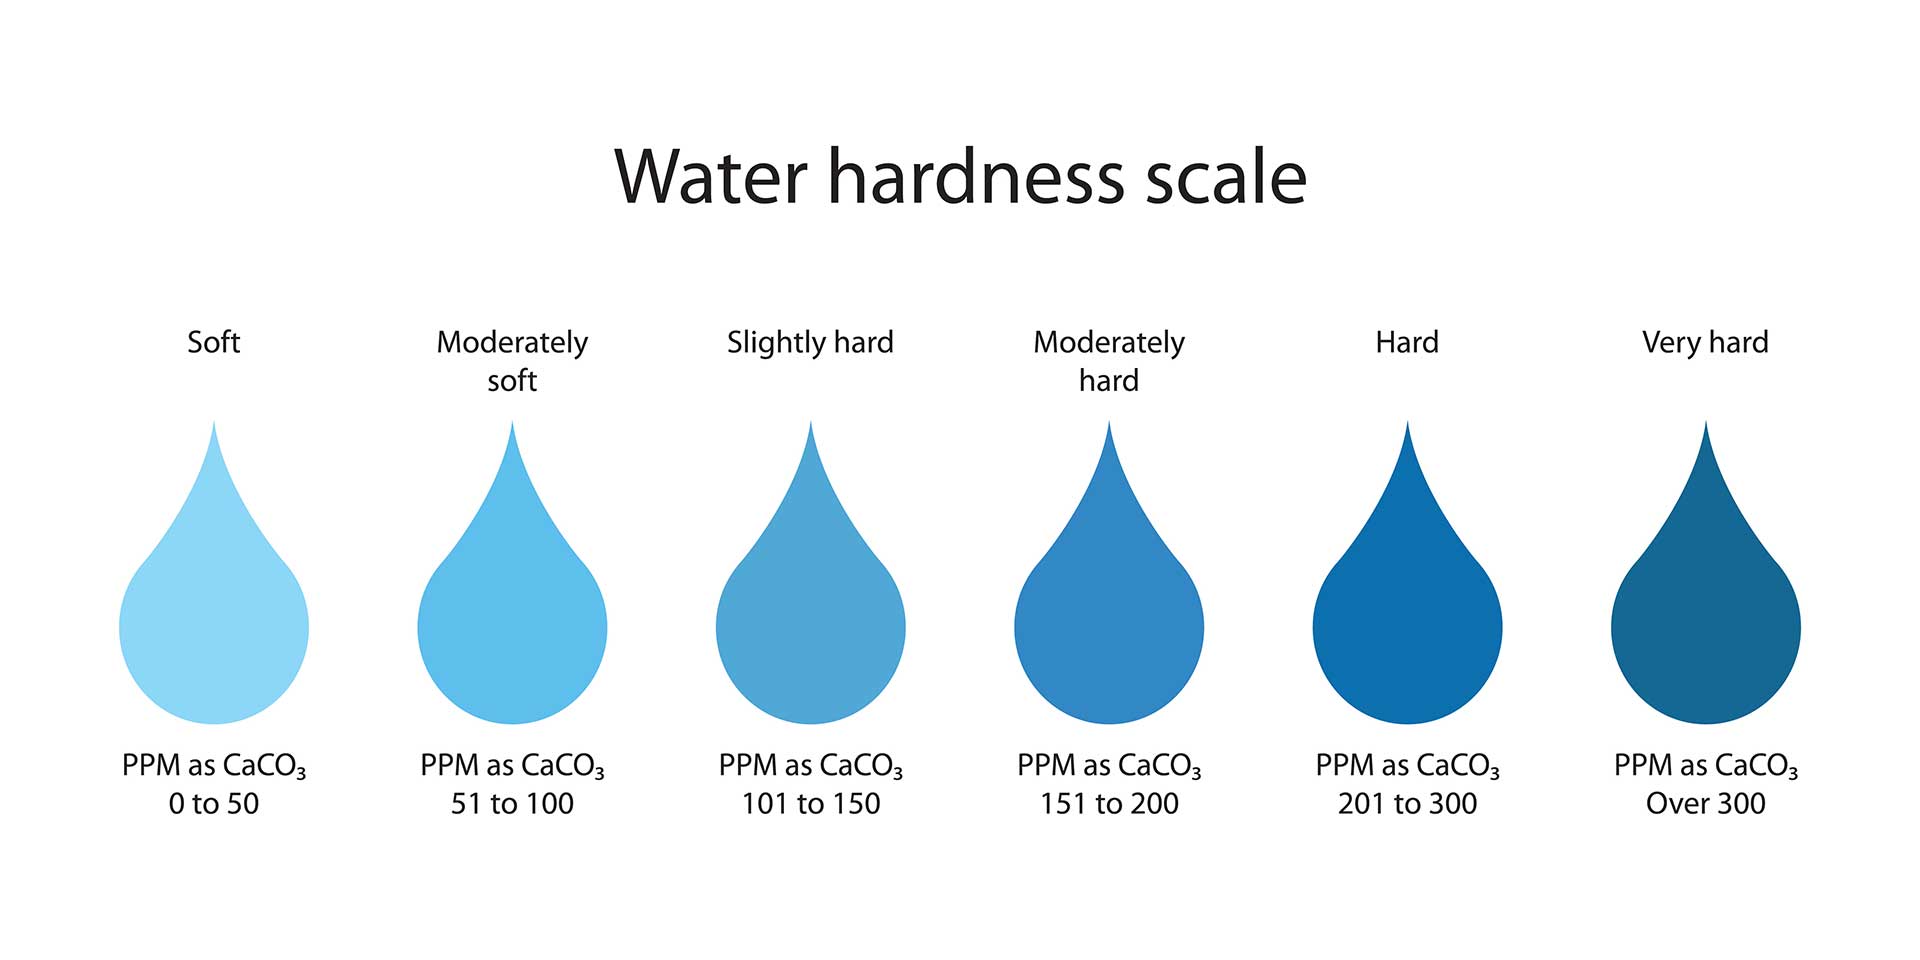 Check out this water hardness scale to see how your area measures up